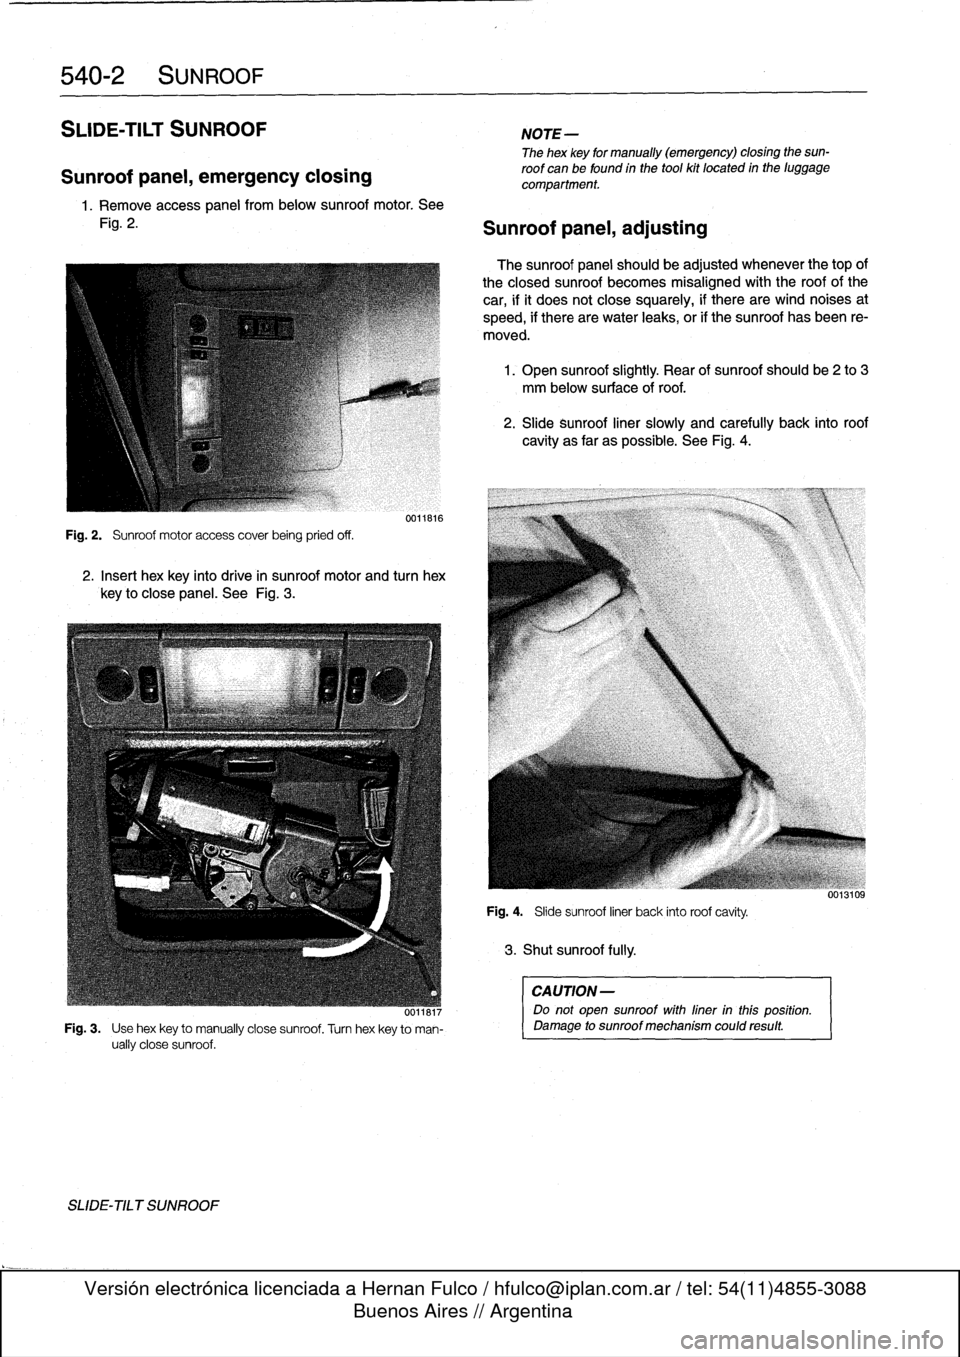 BMW 328i 1997 E36 Workshop Manual 
540-2
SUNROOF

SLIDE-TILT
SUNROOF

Sunroof
panel,
emergency
closing

1.
Remove
access
panel
frombelow
sunroof
motor
.
See

Fig
.
2
.

Fig
.
2
.

	

Sunroof
motor
access
coverbeing
pried
off
.

001181